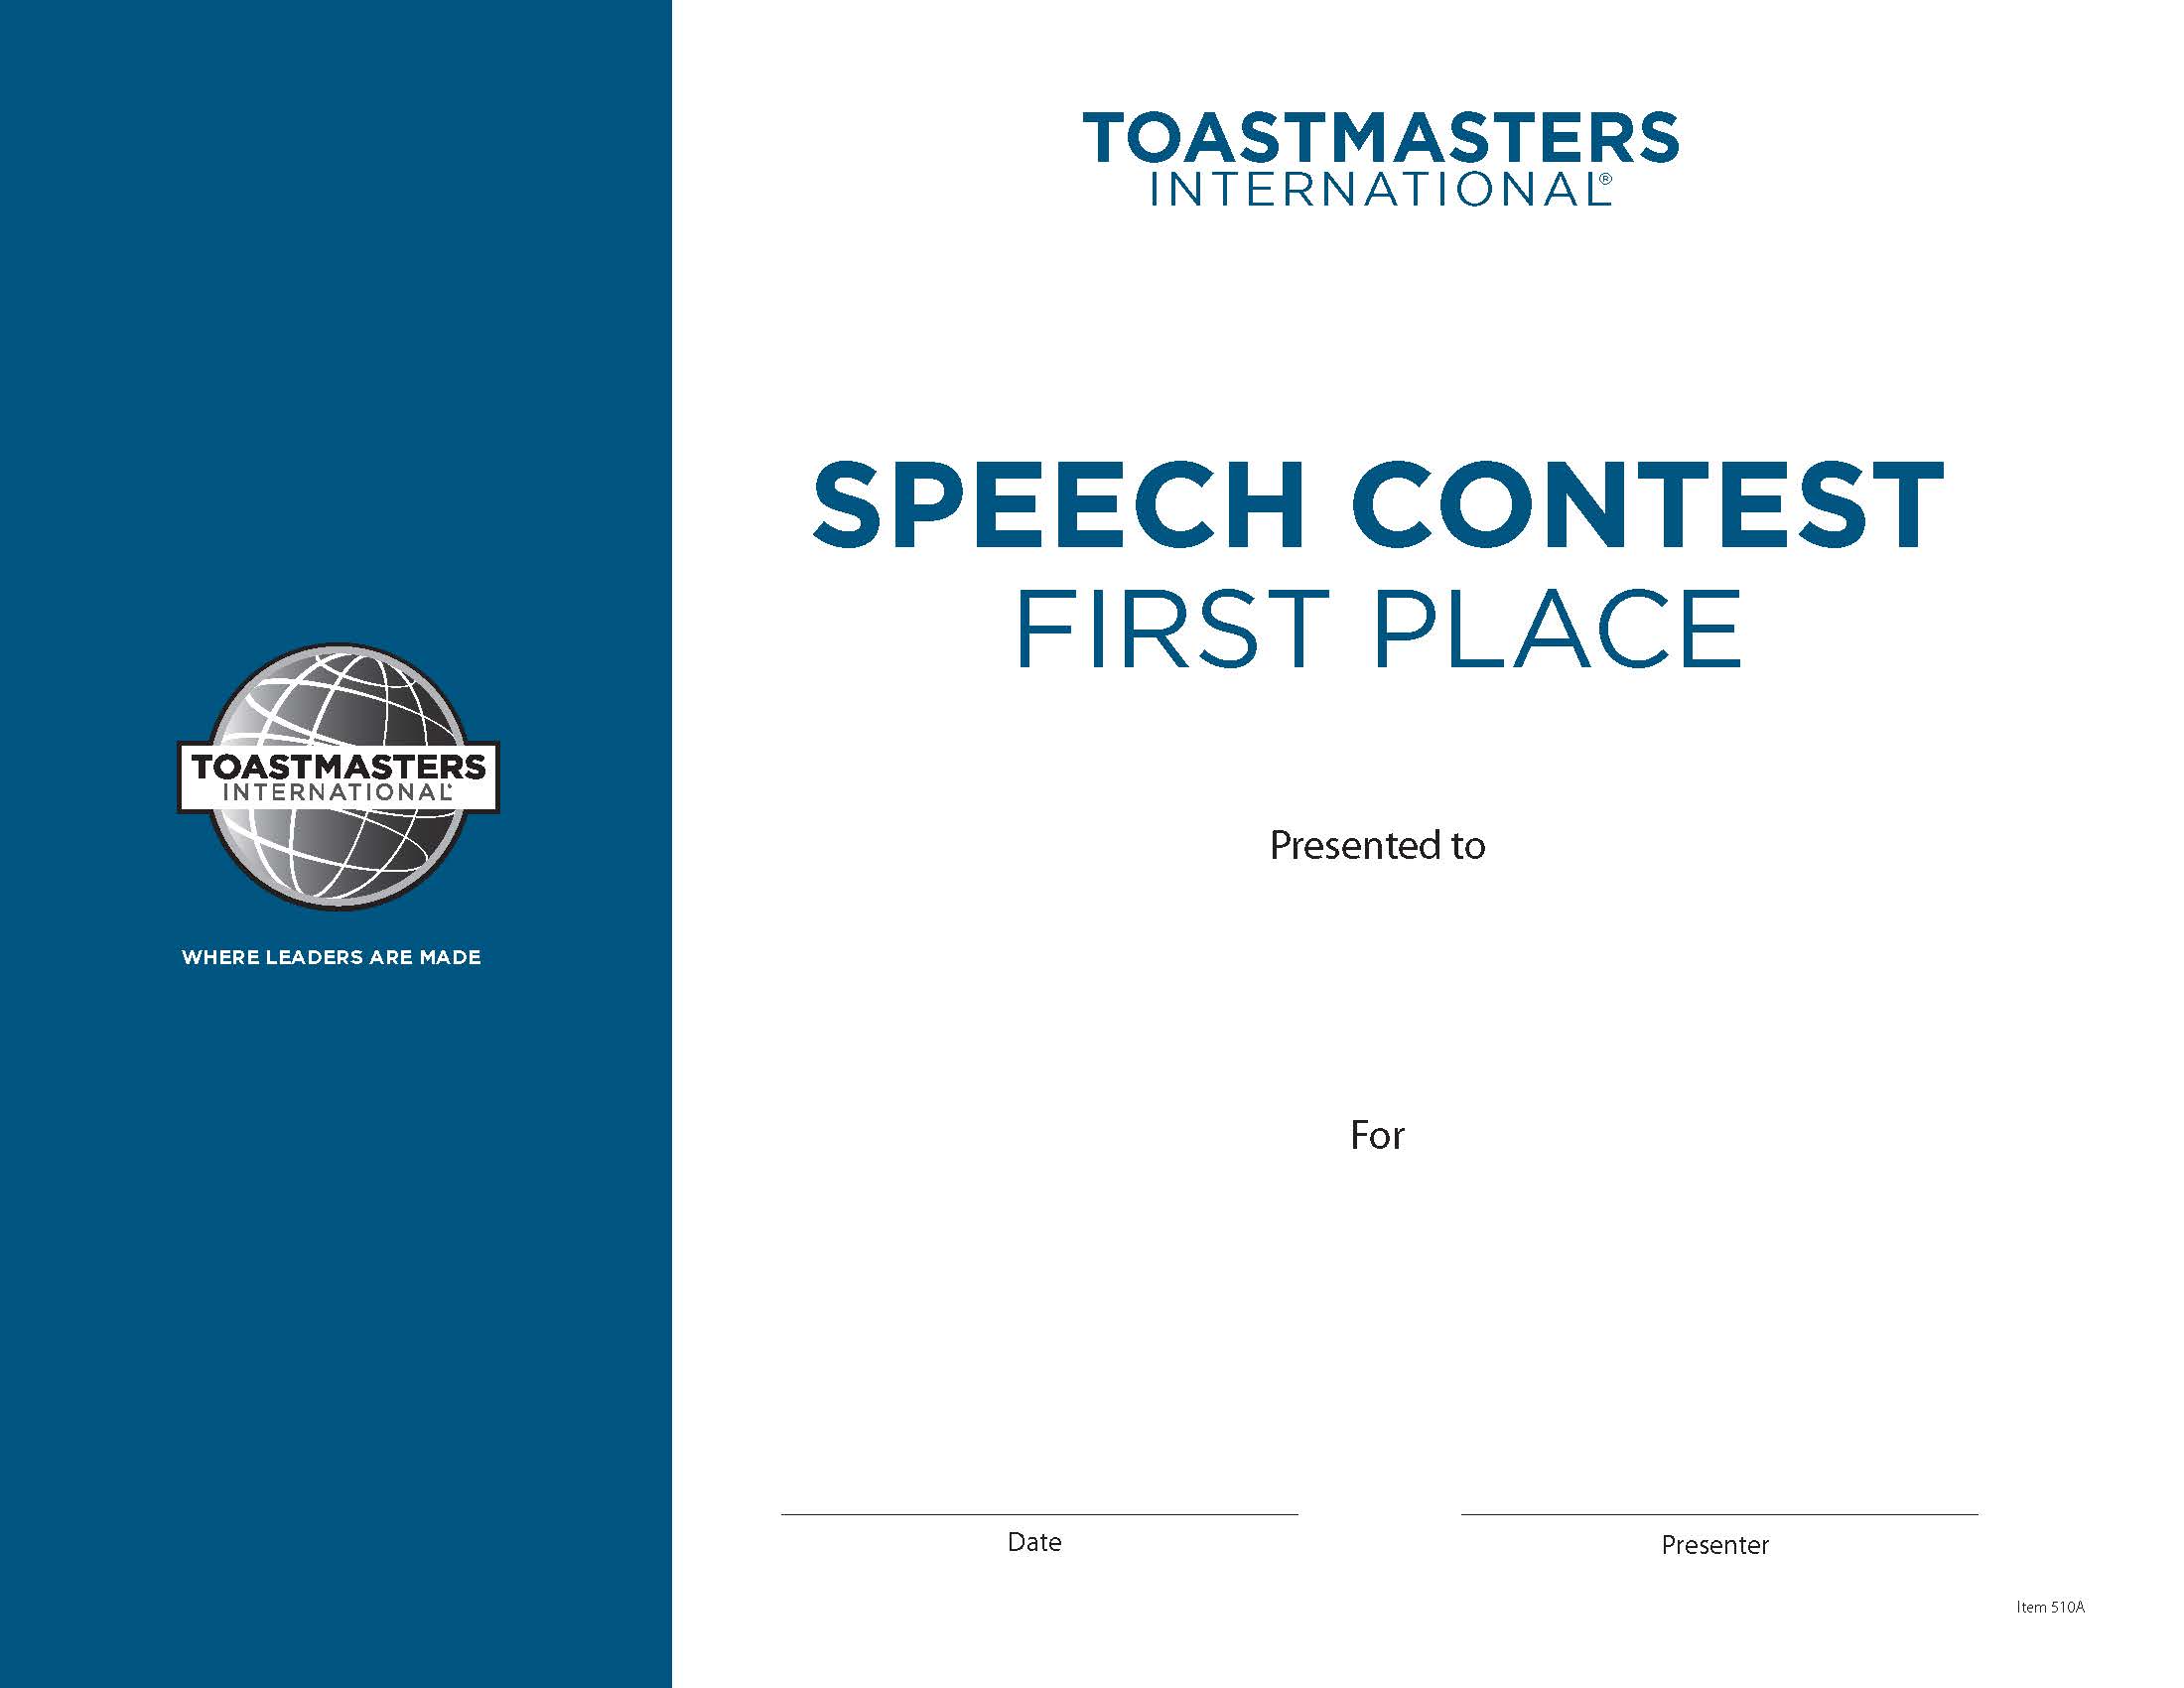 Toastmasters Speech Contest First Place